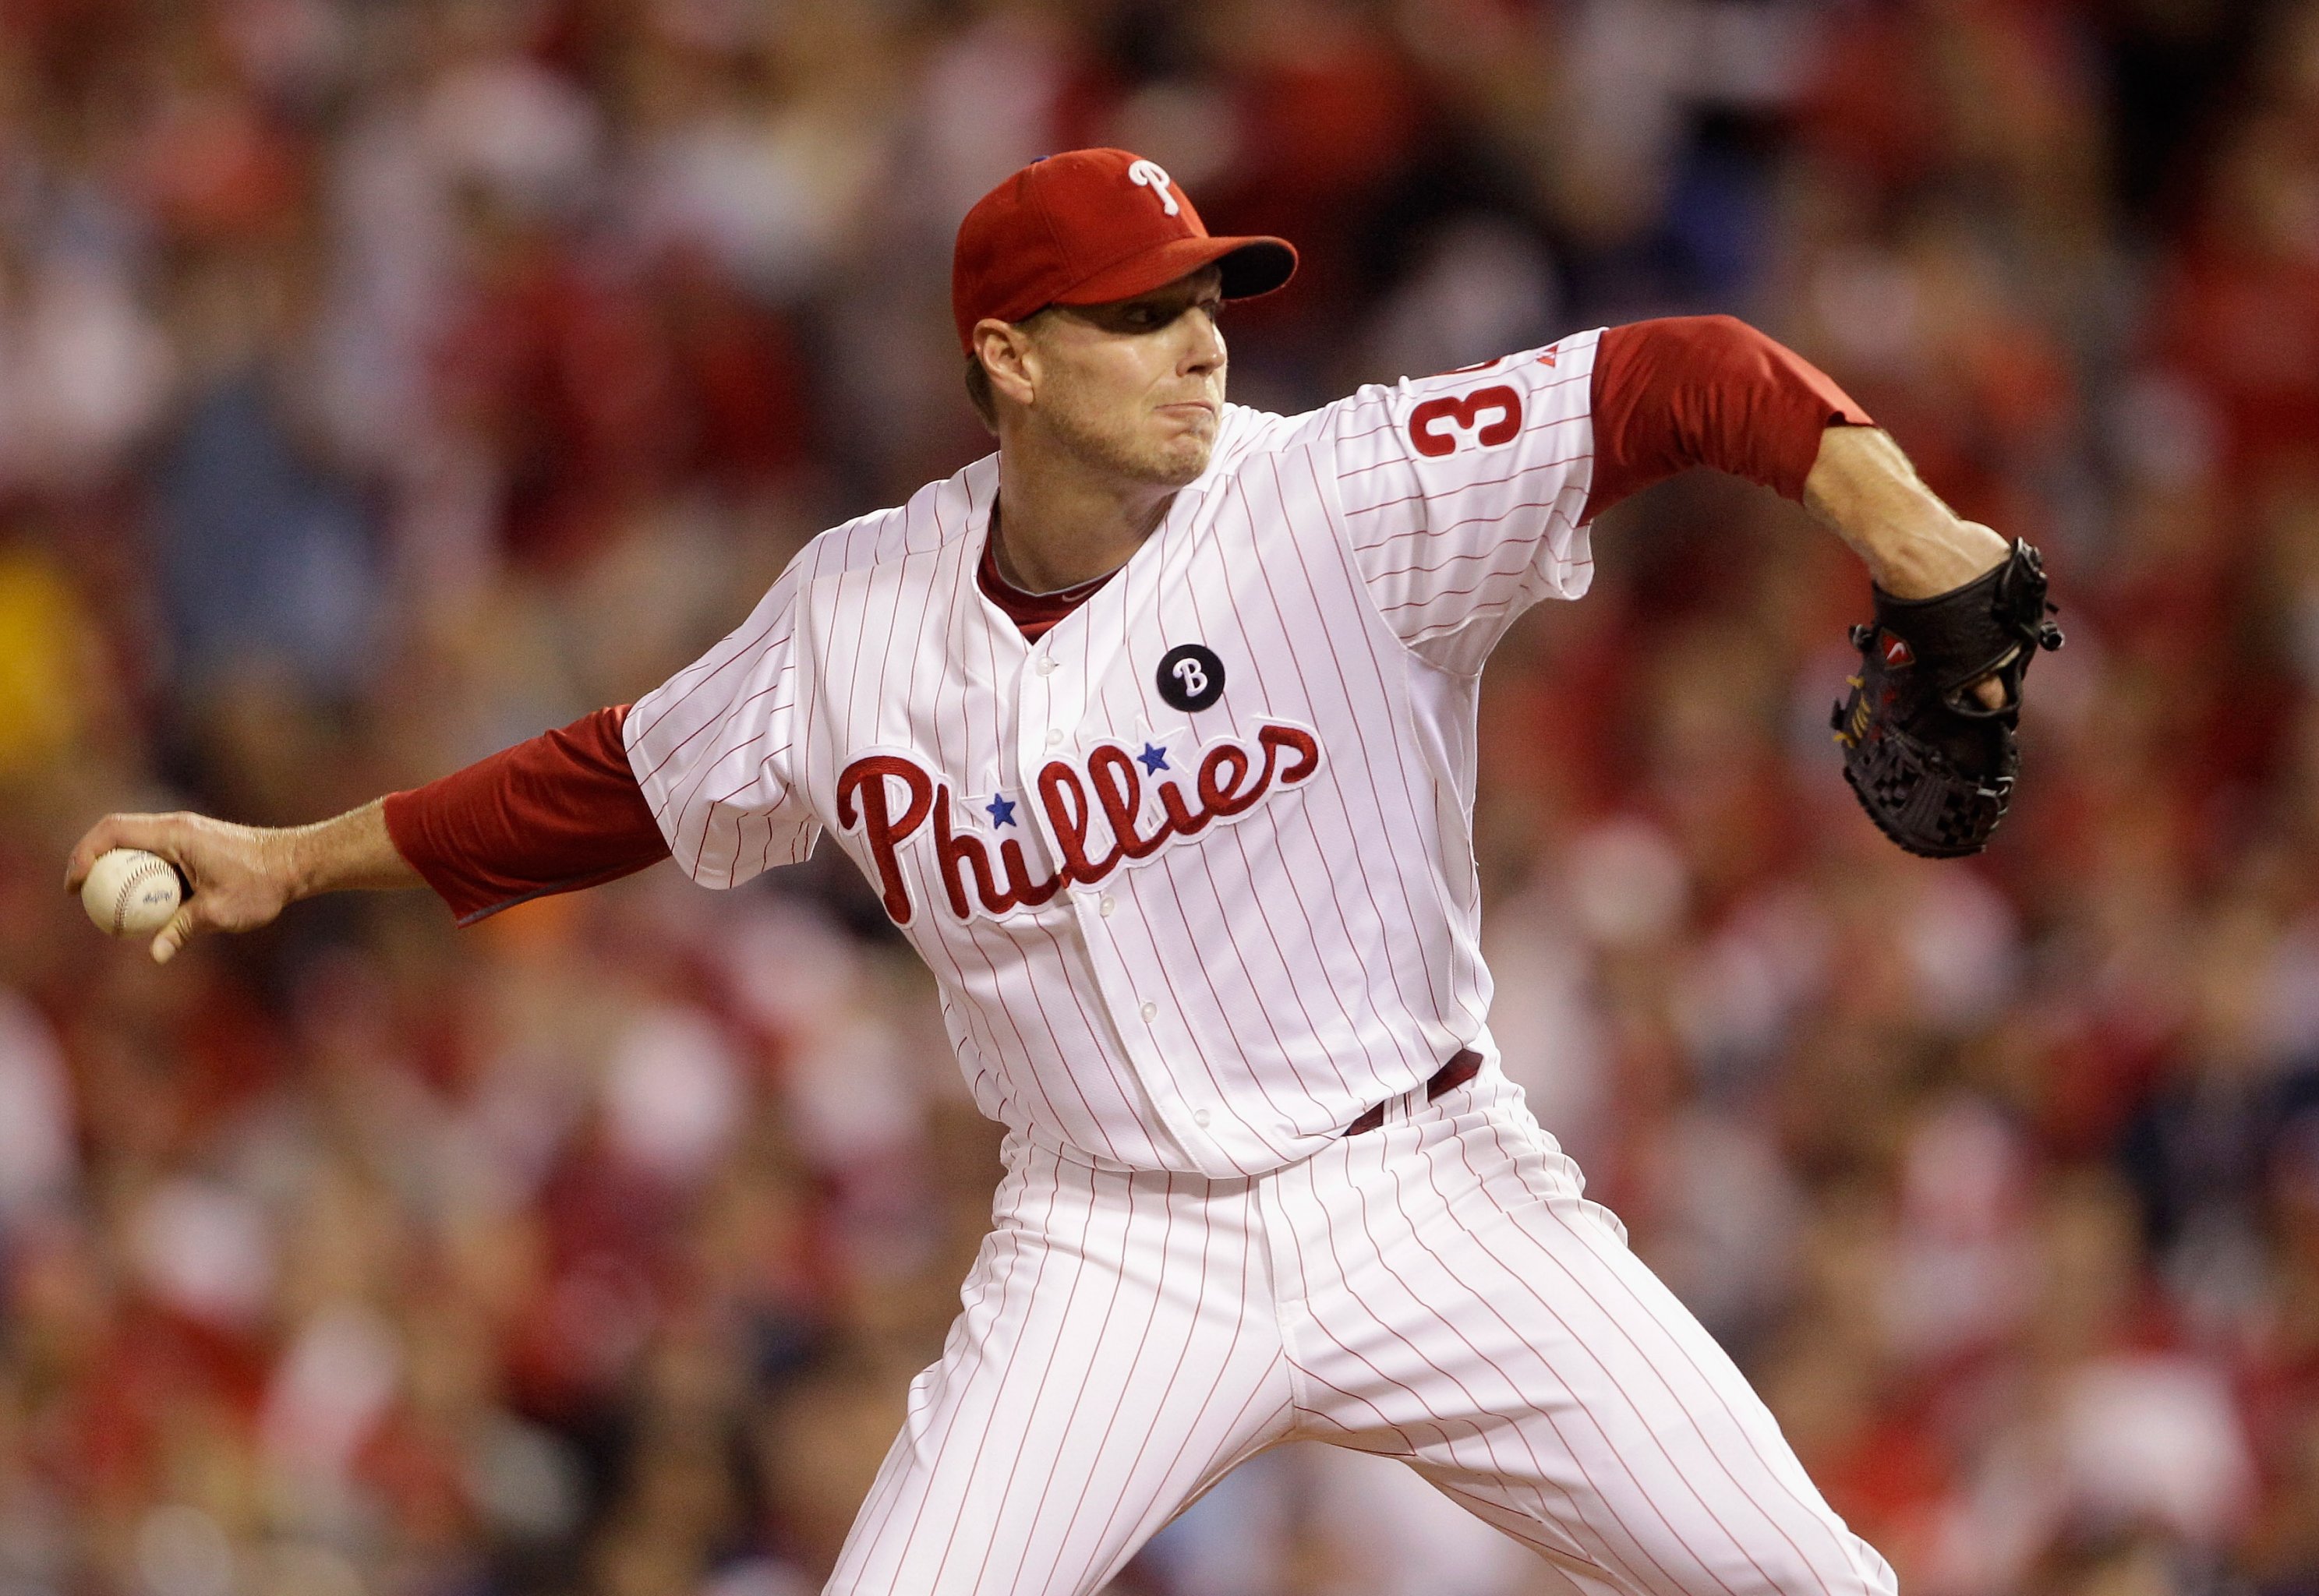 Doug Pederson threw out the first pitch for the Phillies in a Roy Halladay  jersey 